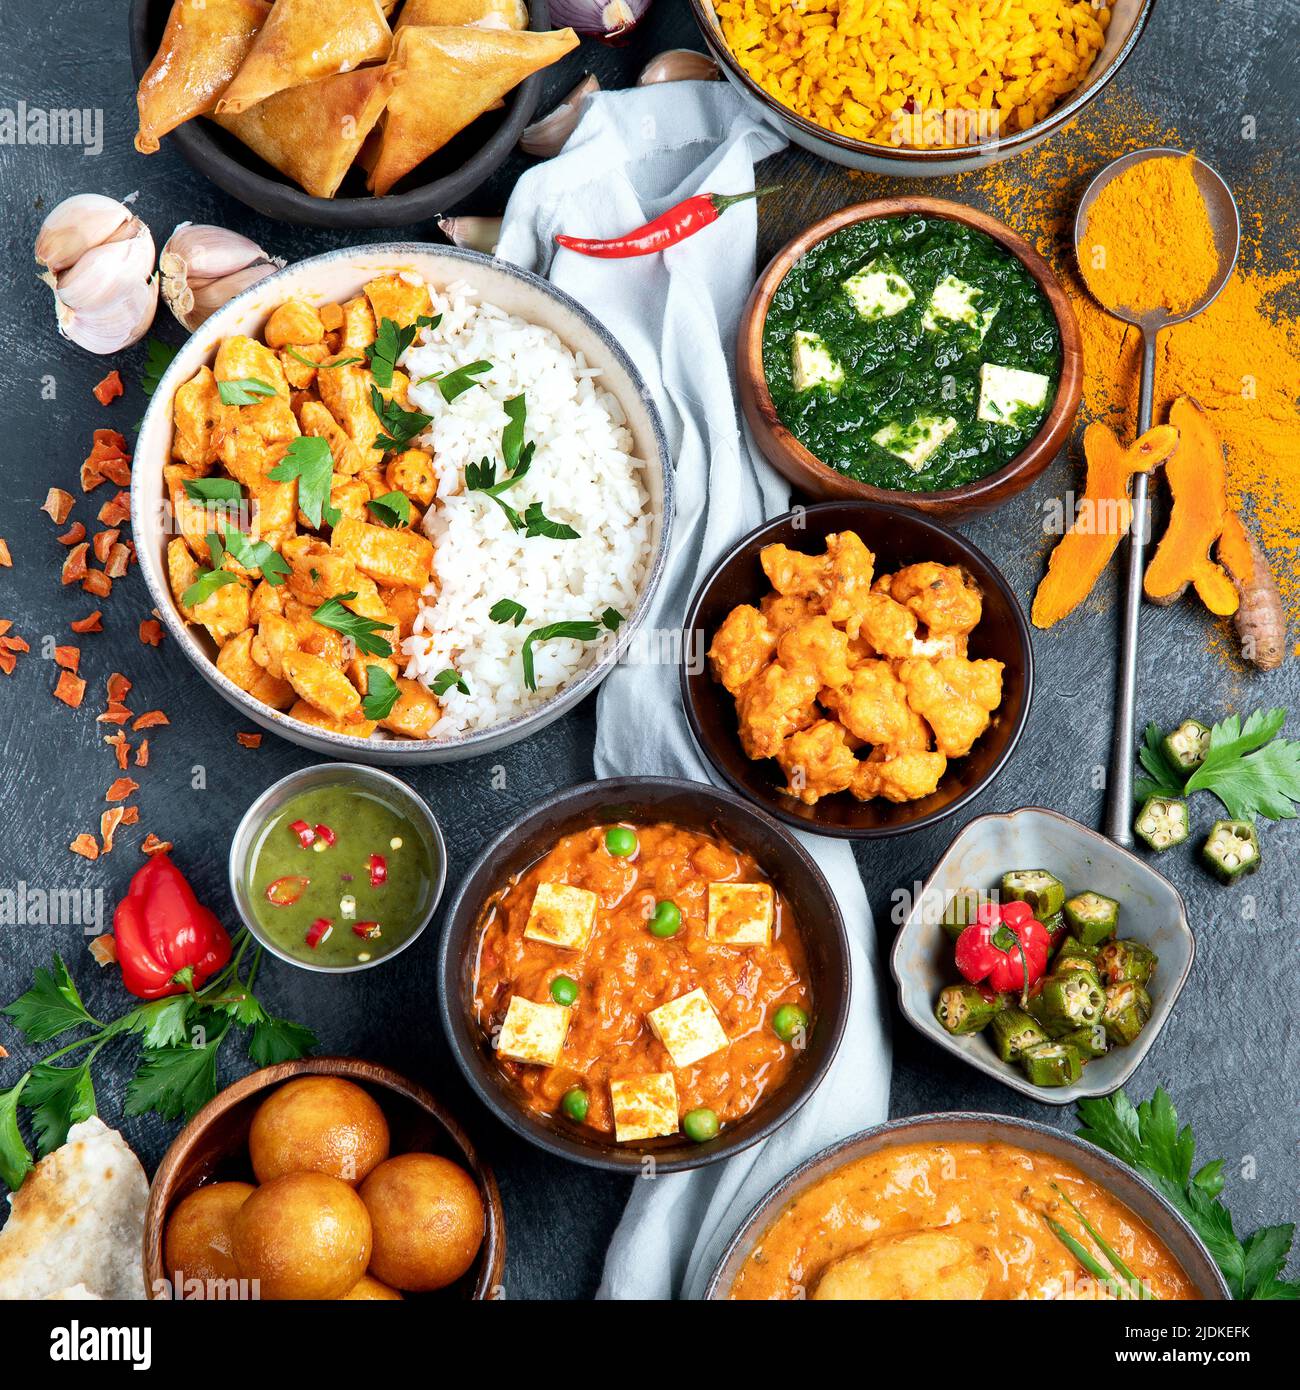 Dishes of indian cuisine. Curry, butter chicken, rice, lentils, paneer, samosa, spices. Bowls and plates with indian foodon dark on dark background. T Stock Photo